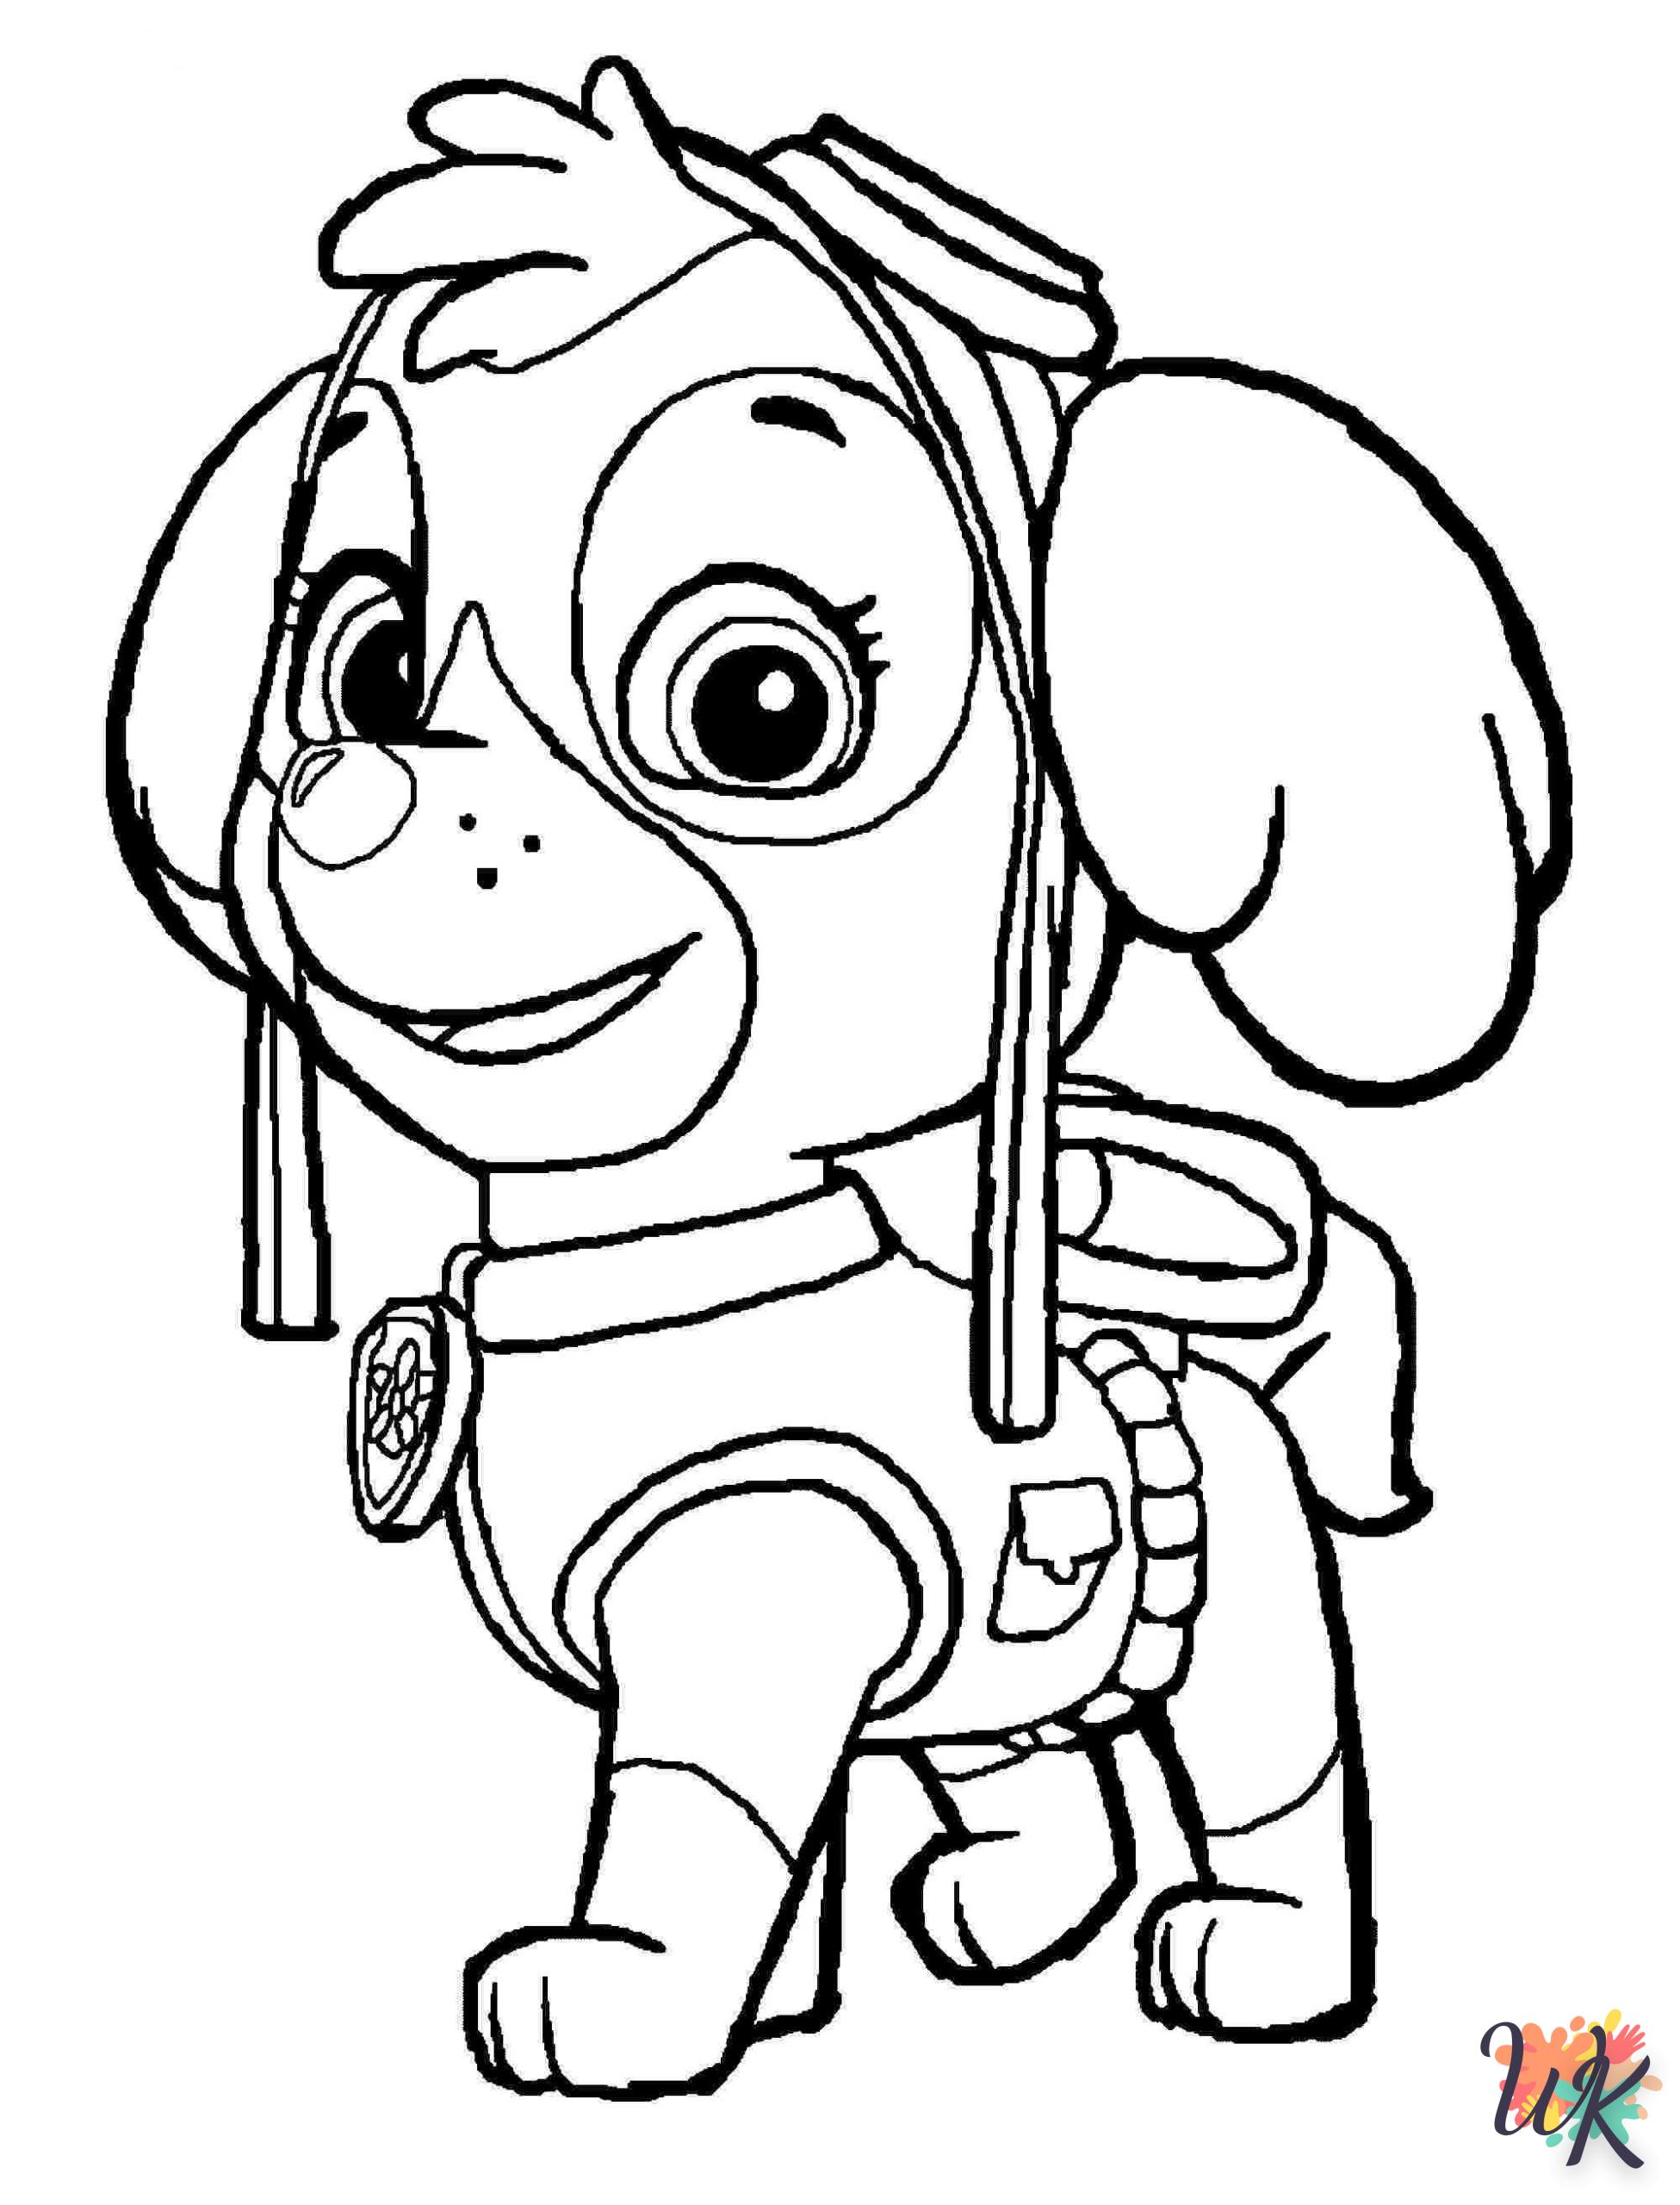 Paw Patrol coloring pages to print